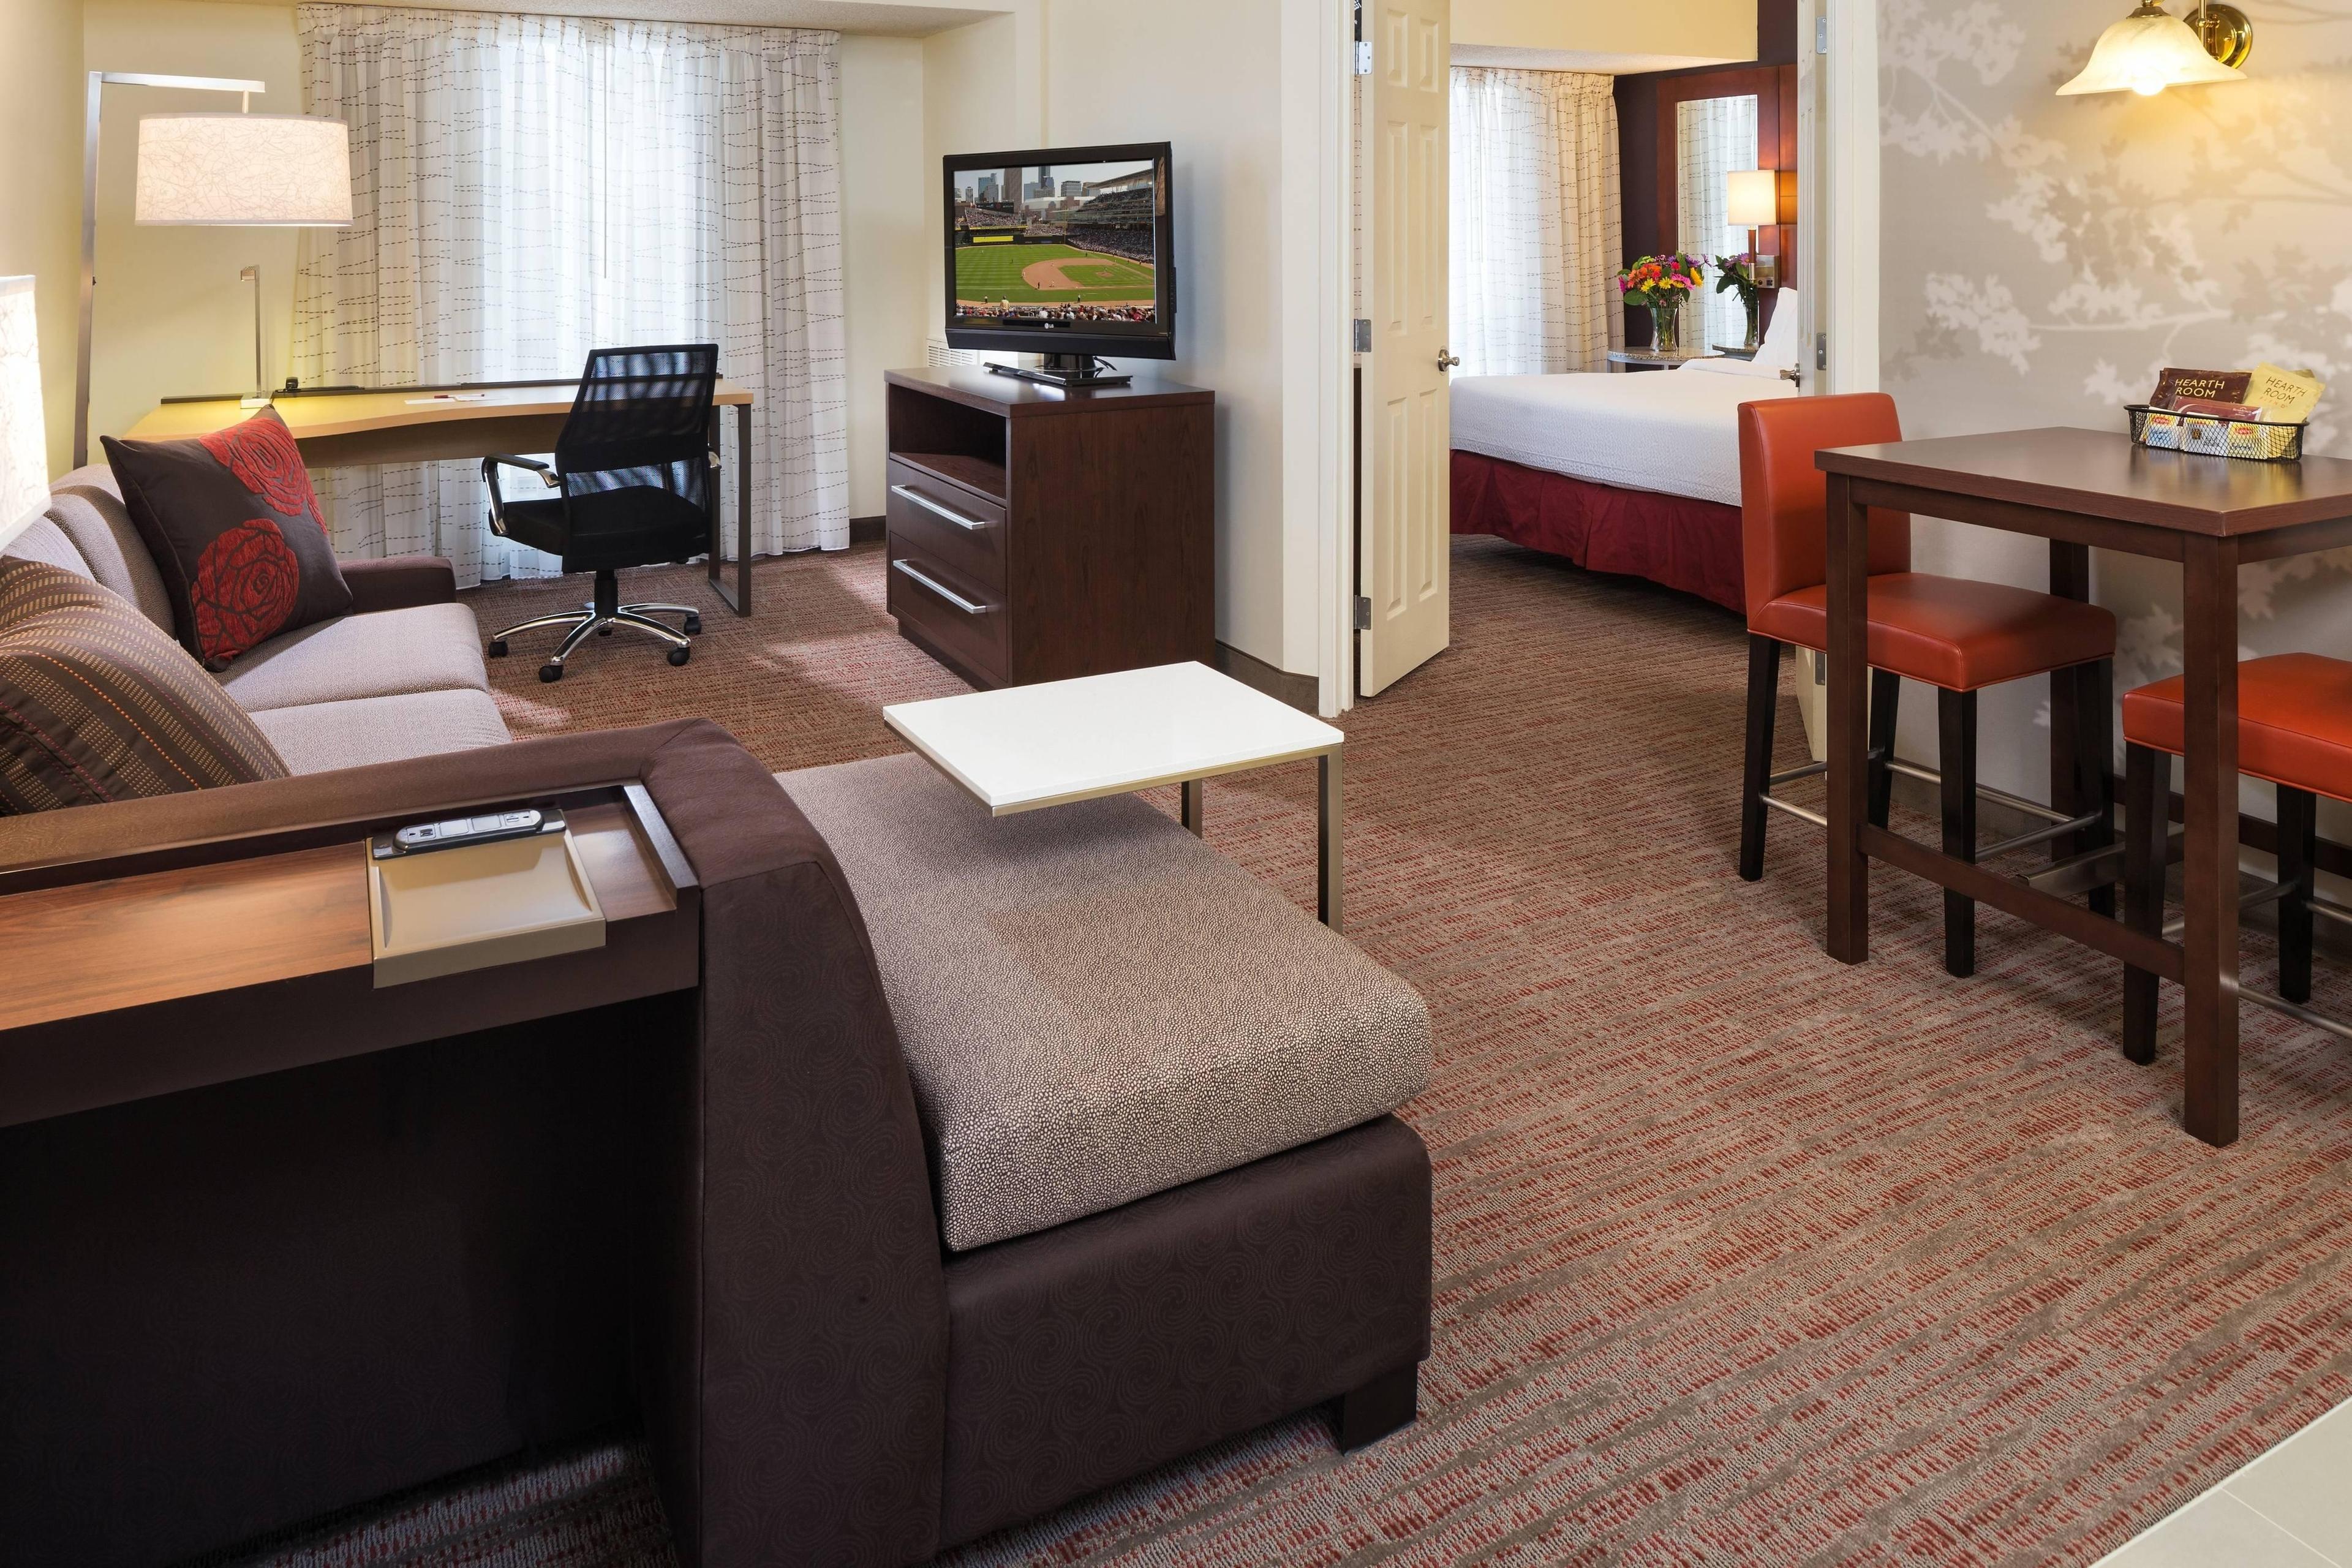 Enjoy all the comforts of a modern home in our One-Bedroom Suite.